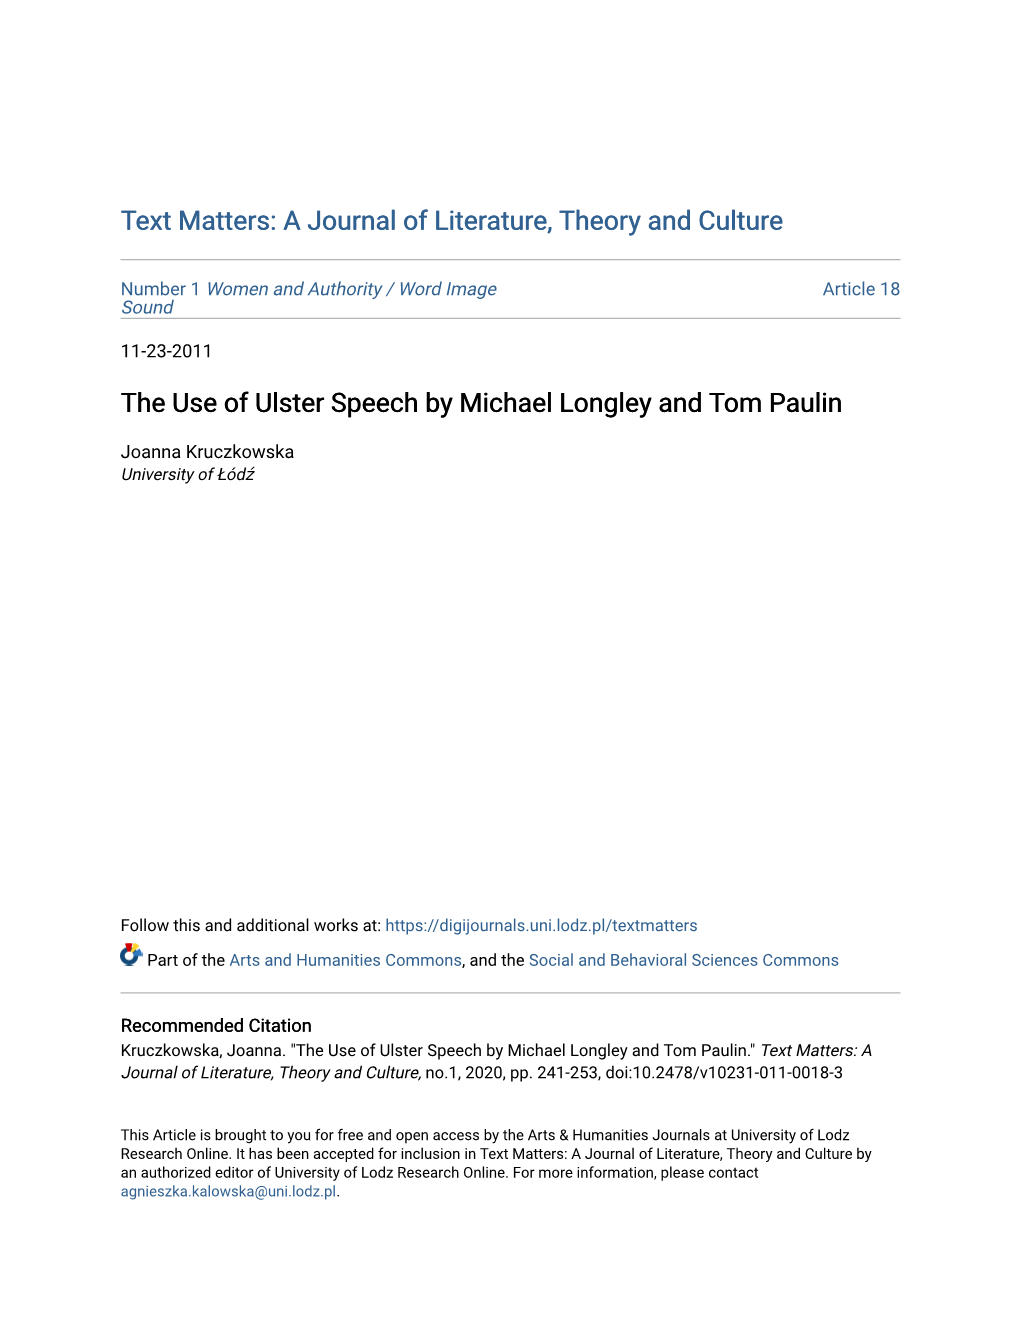 The Use of Ulster Speech by Michael Longley and Tom Paulin